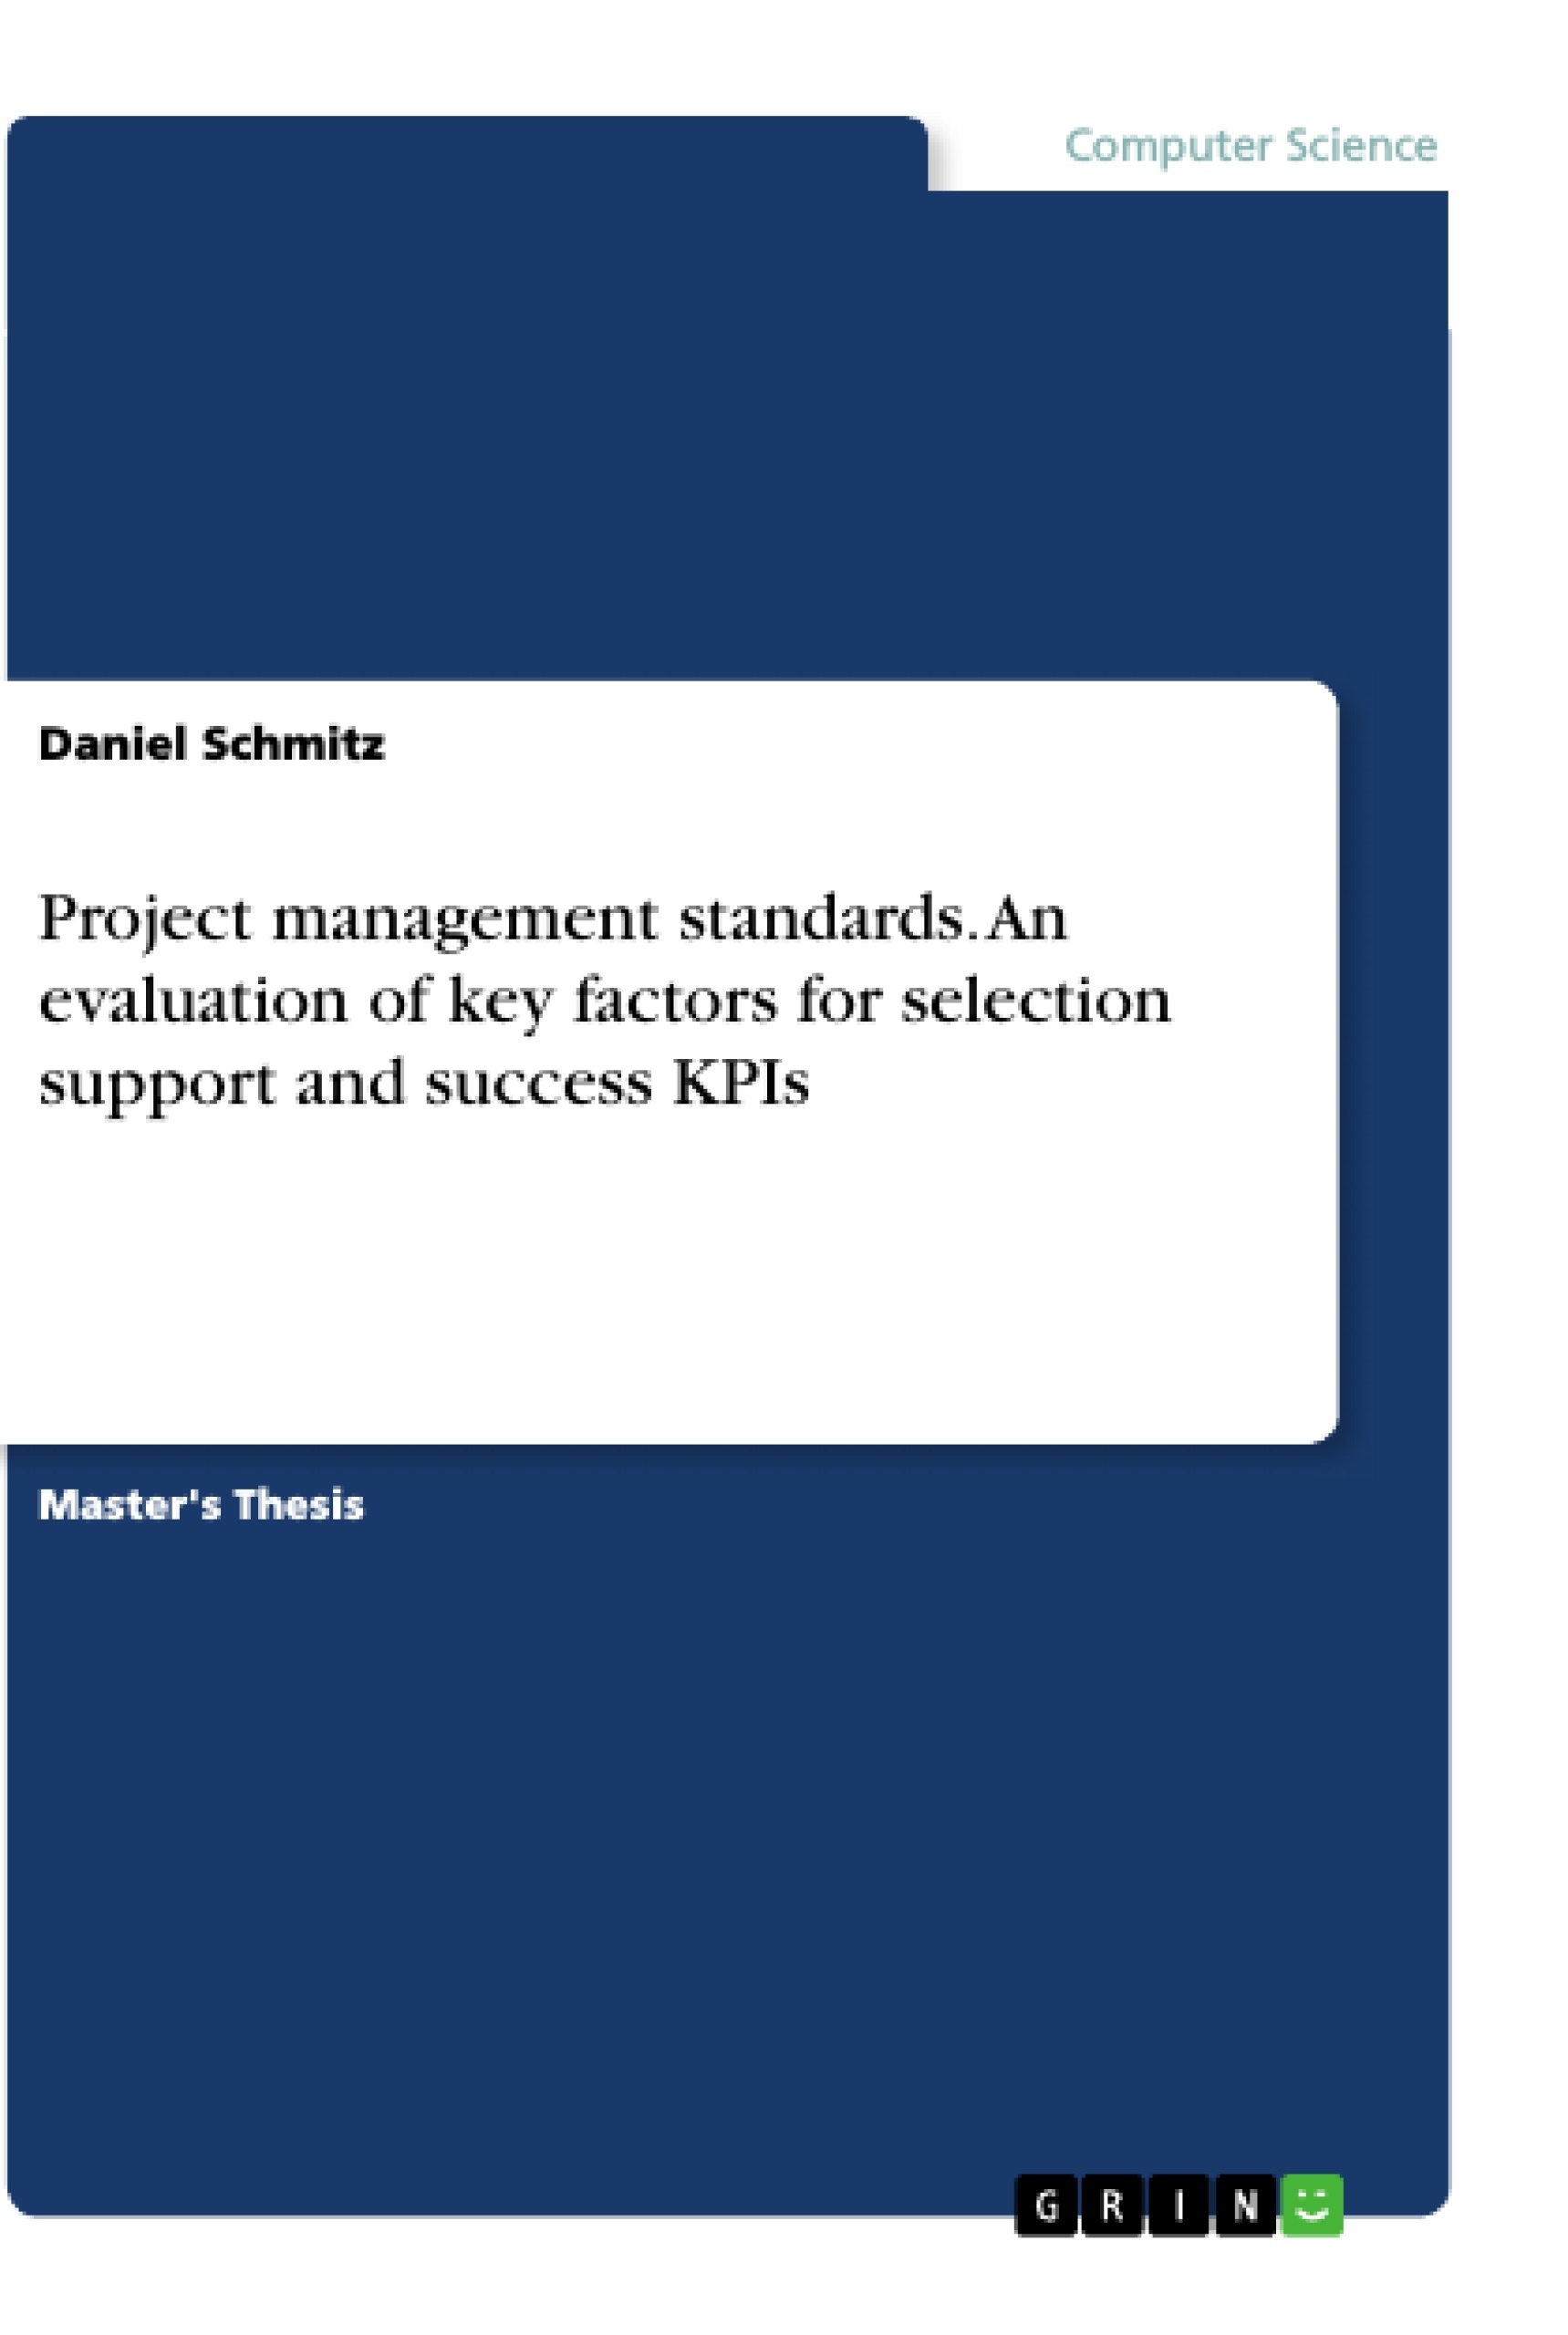 Titre: Project management standards. An evaluation of key factors for selection support and success KPIs